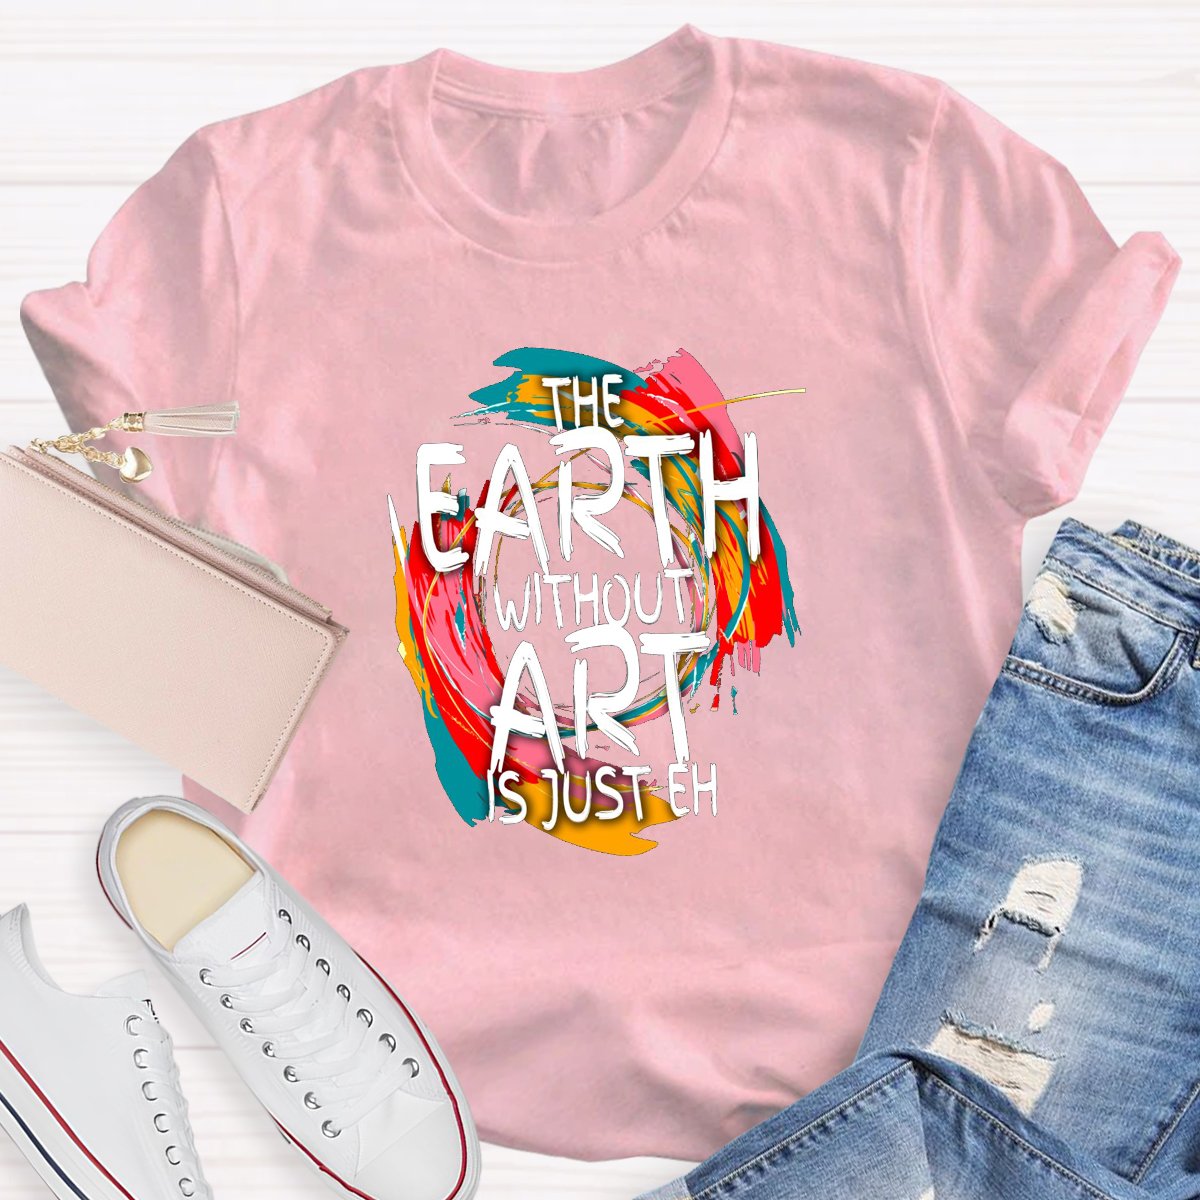 The Earth Without Art Is Just Eh Teacher's Graphic Tee